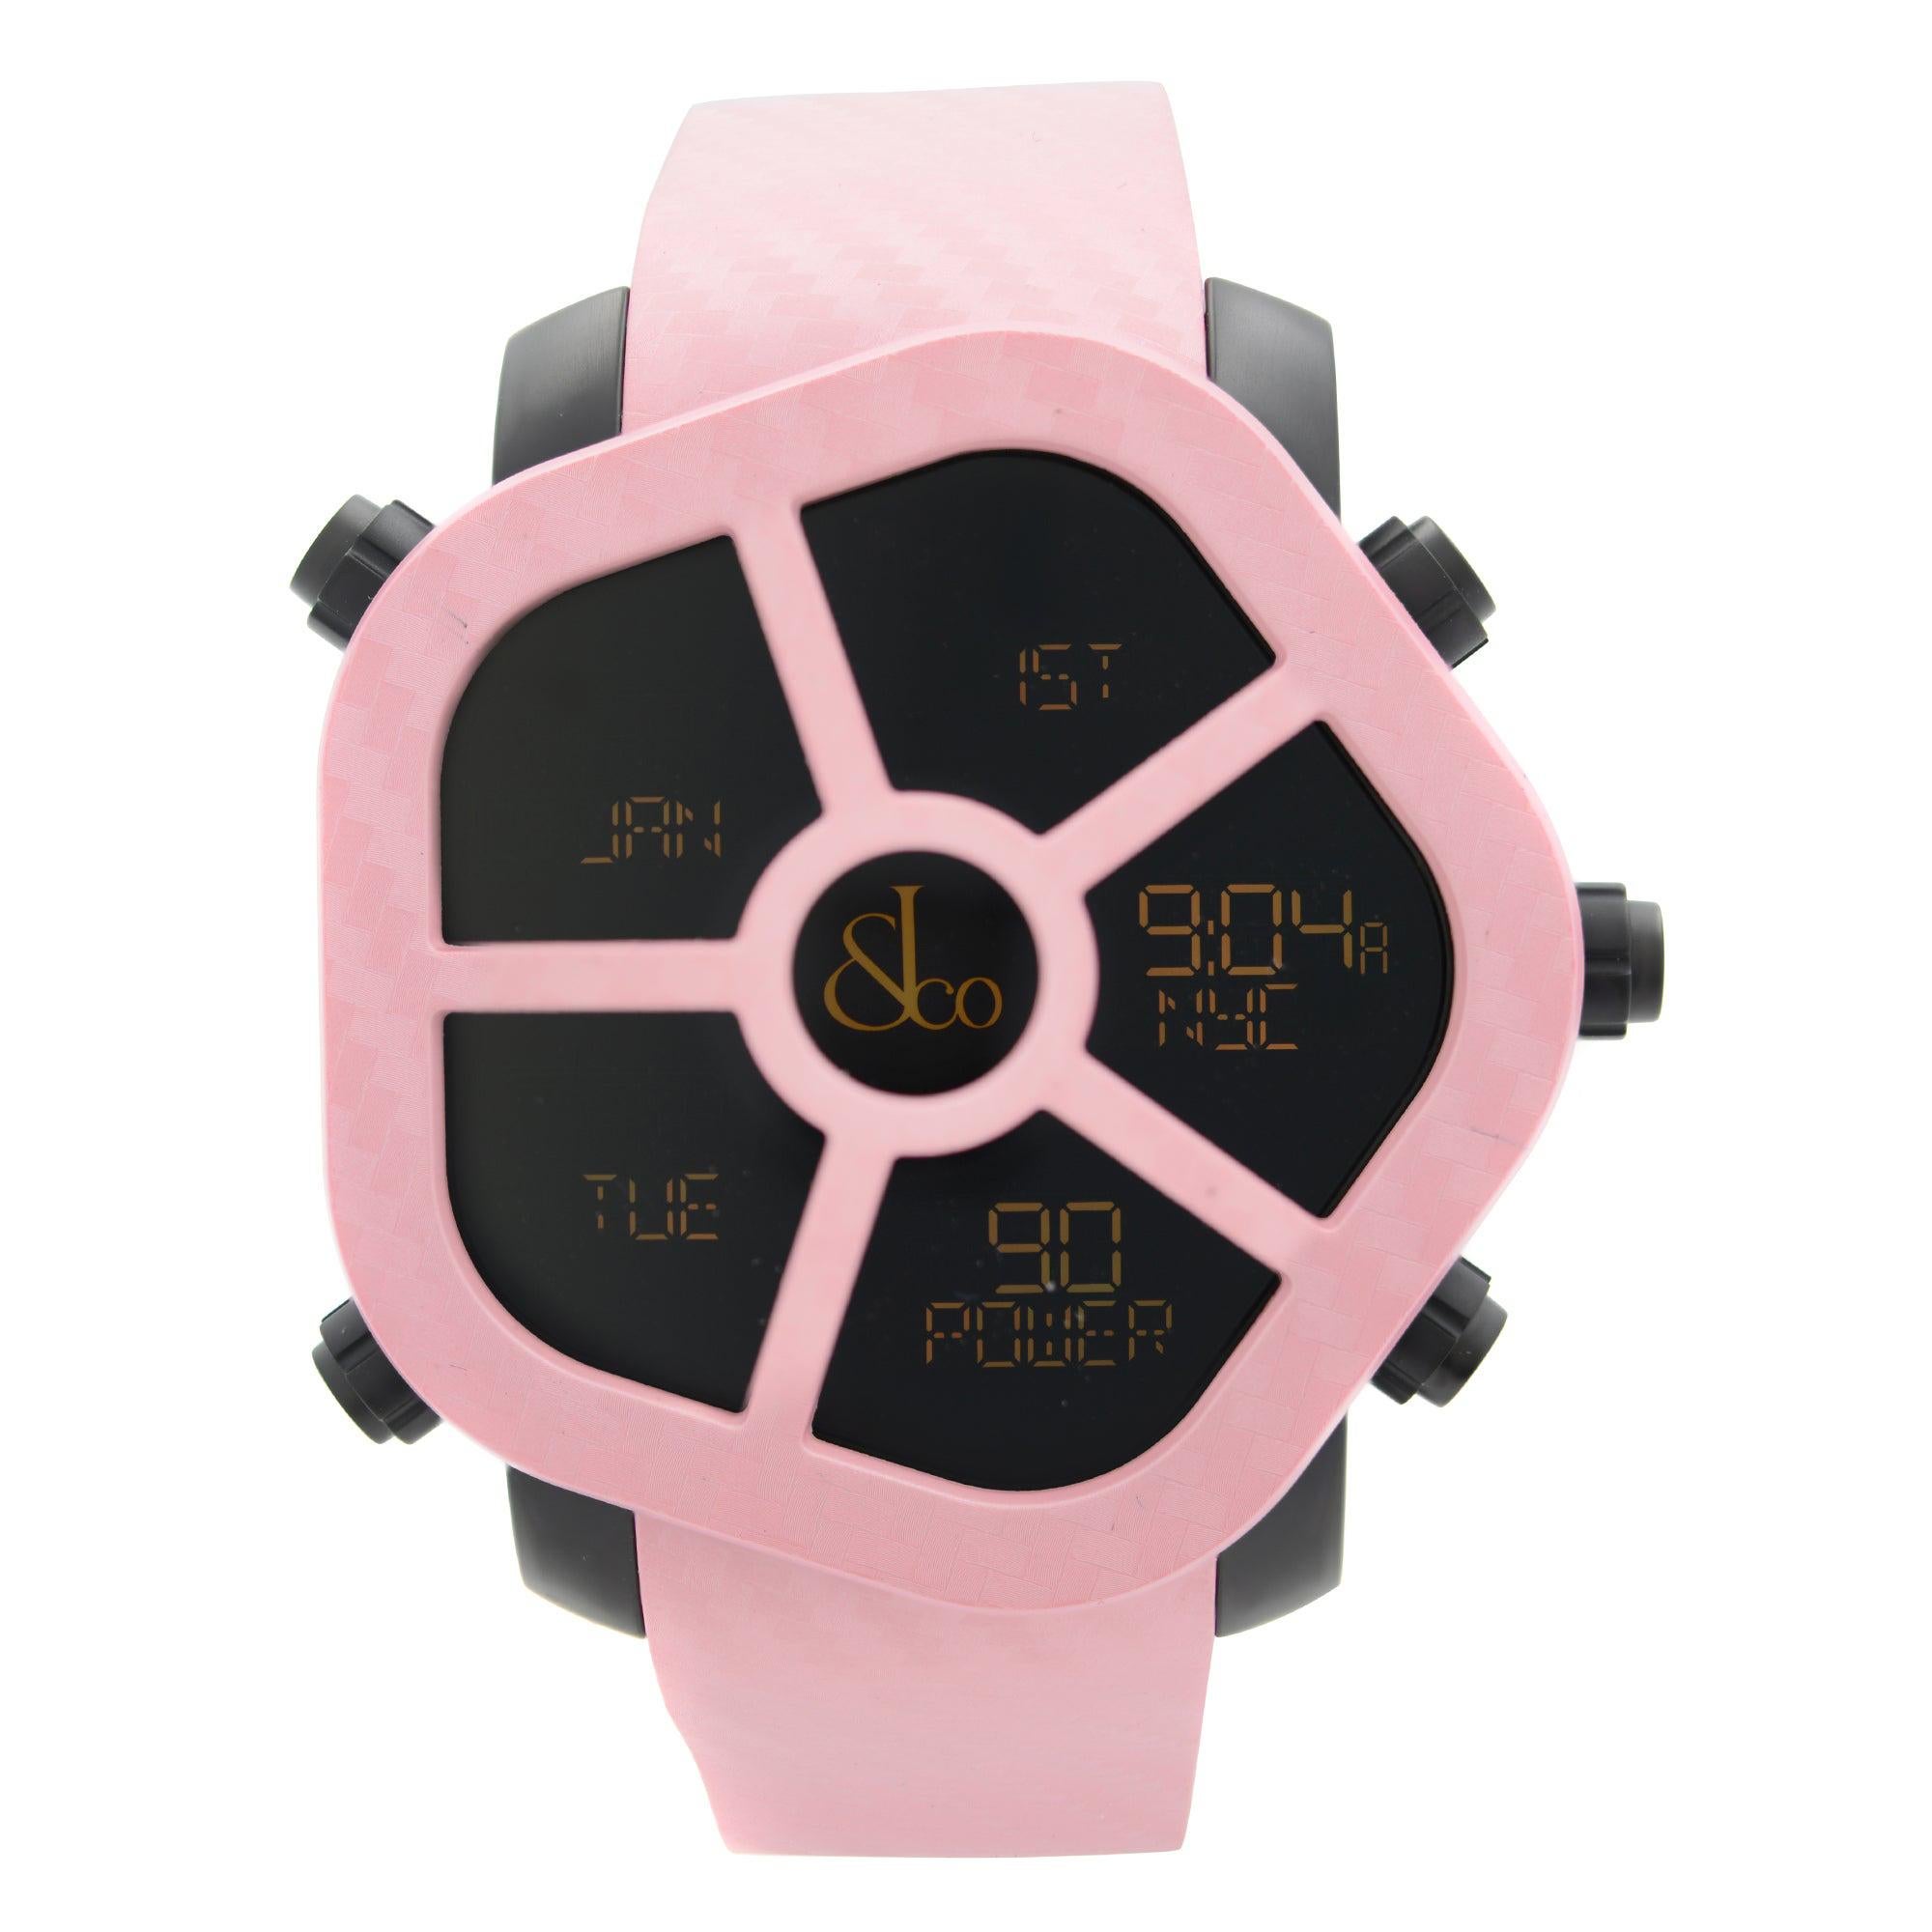 Jacob & Co. Ghost 5 Time Zone Carbon Bezel Pink Mens Watch GH100.11.NS.MC.ANK4D